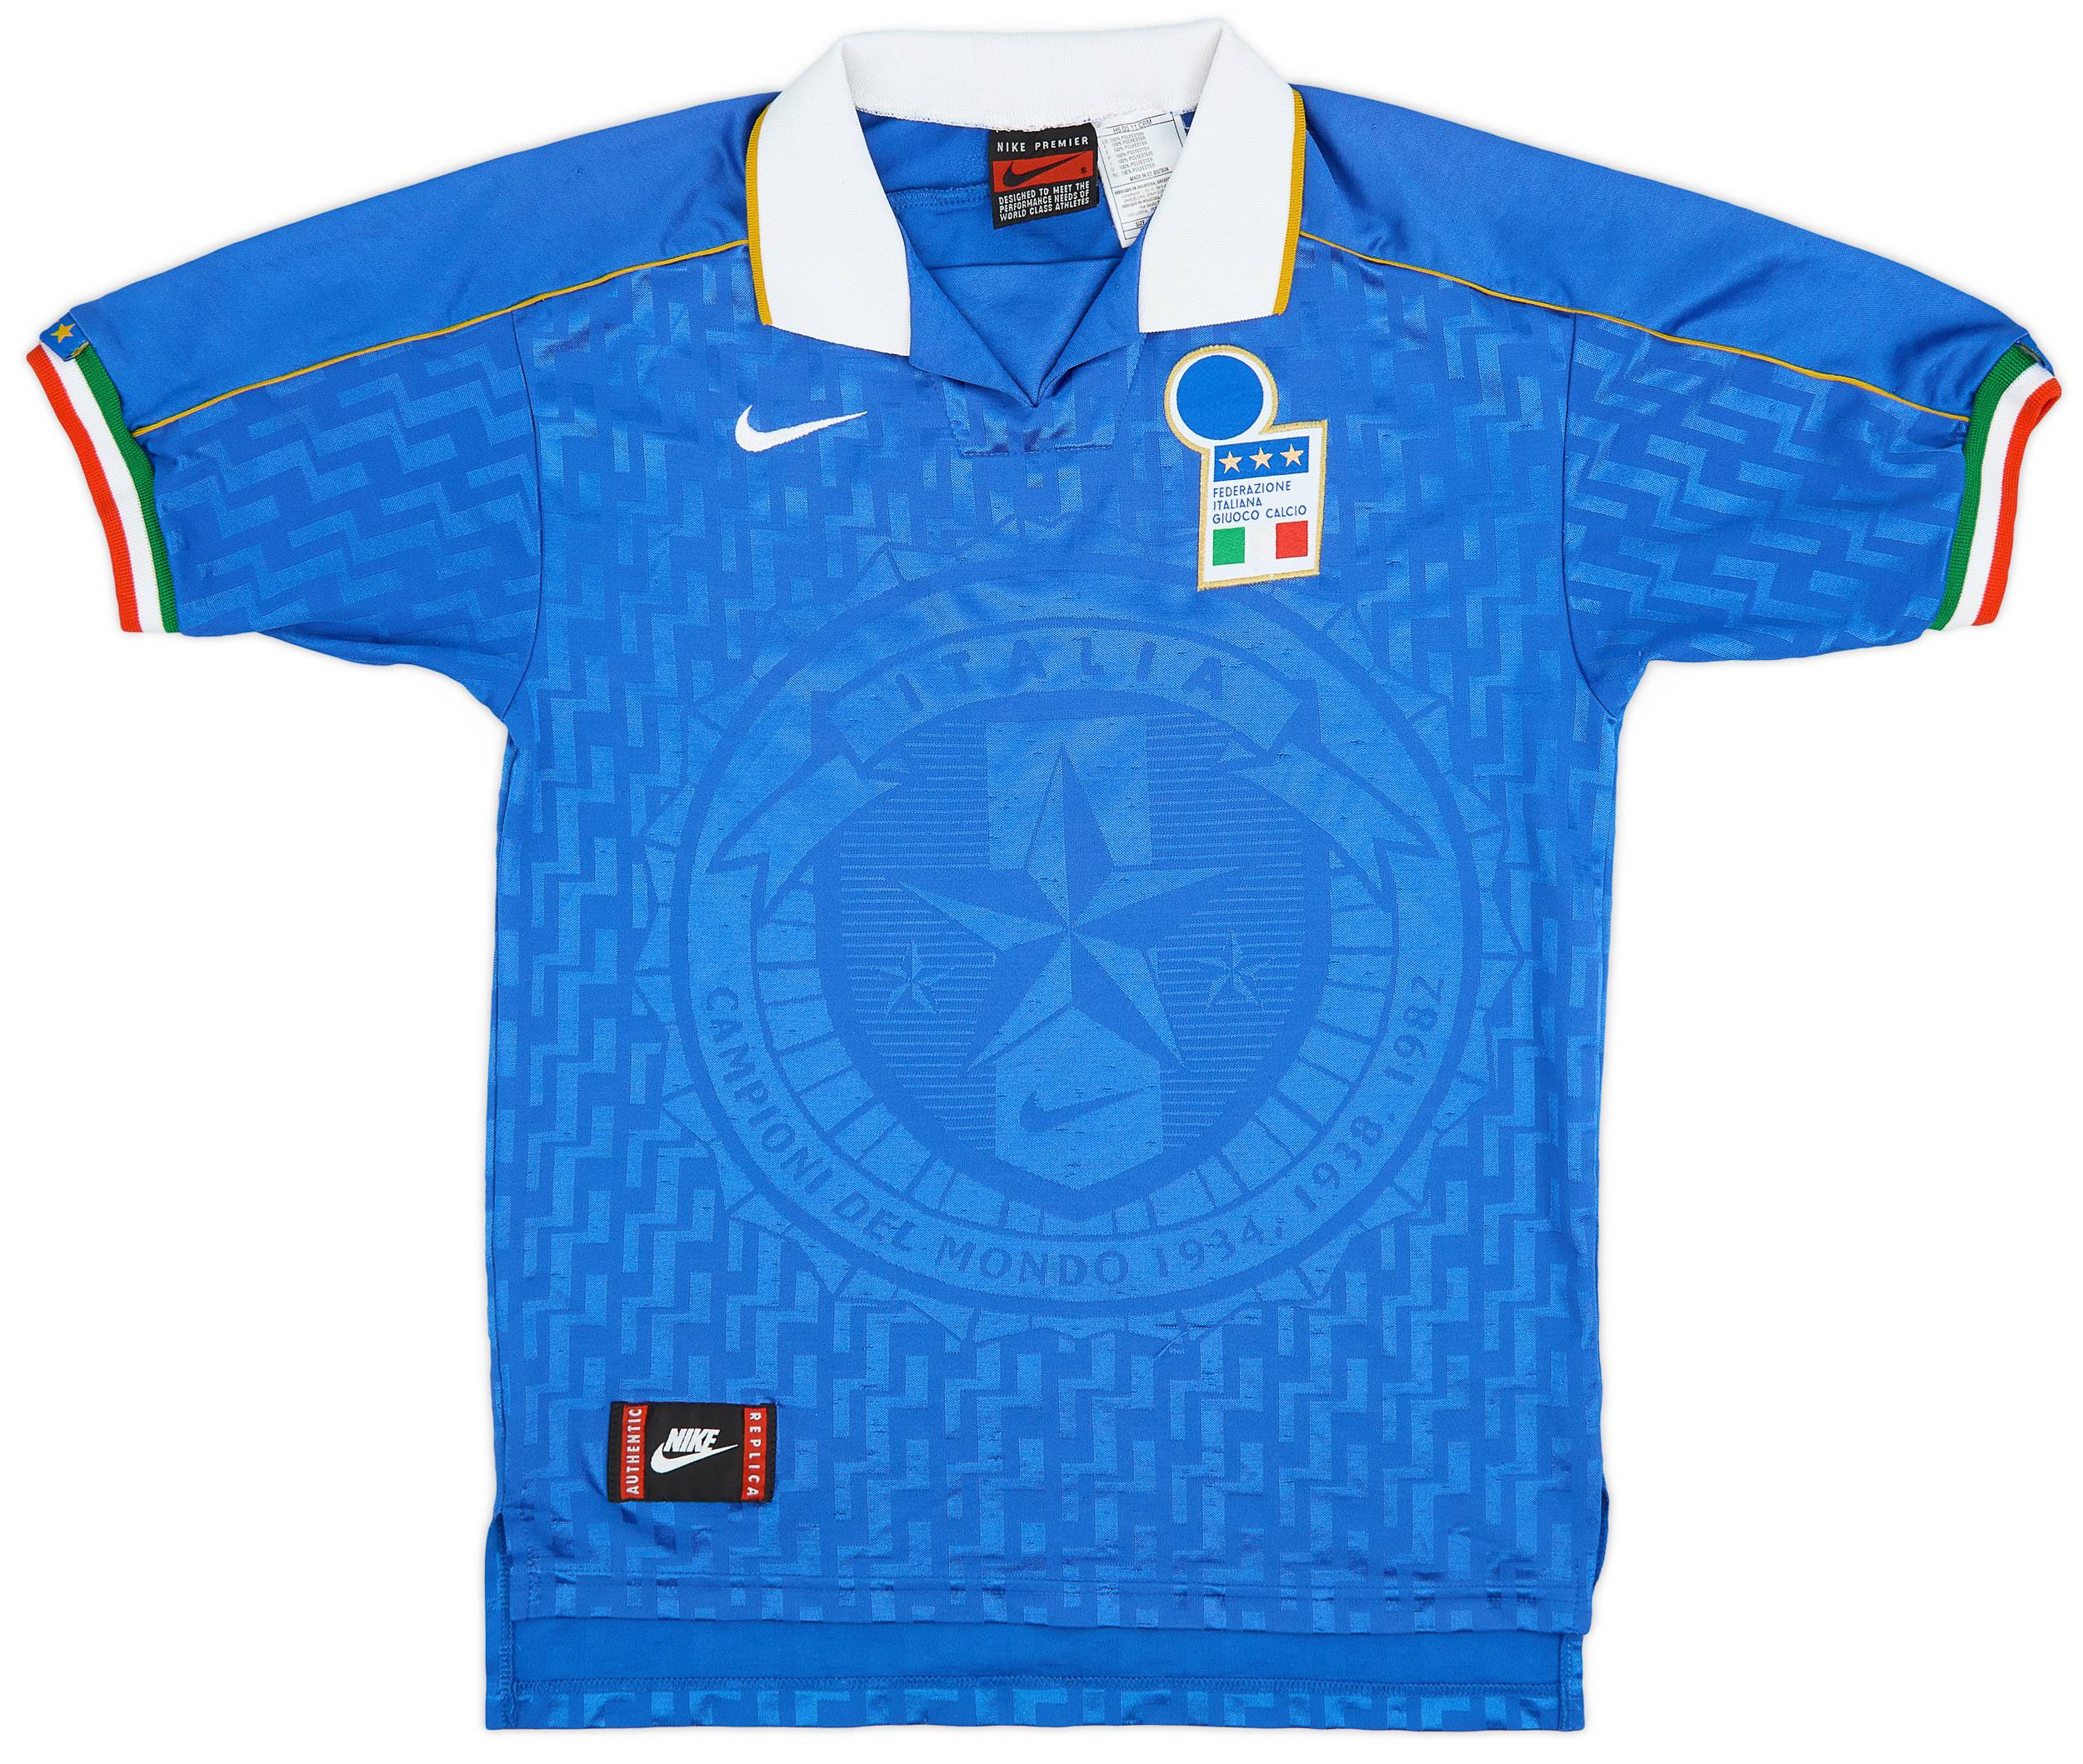 1994-96 Italy Home Shirt - 9/10 - (S)